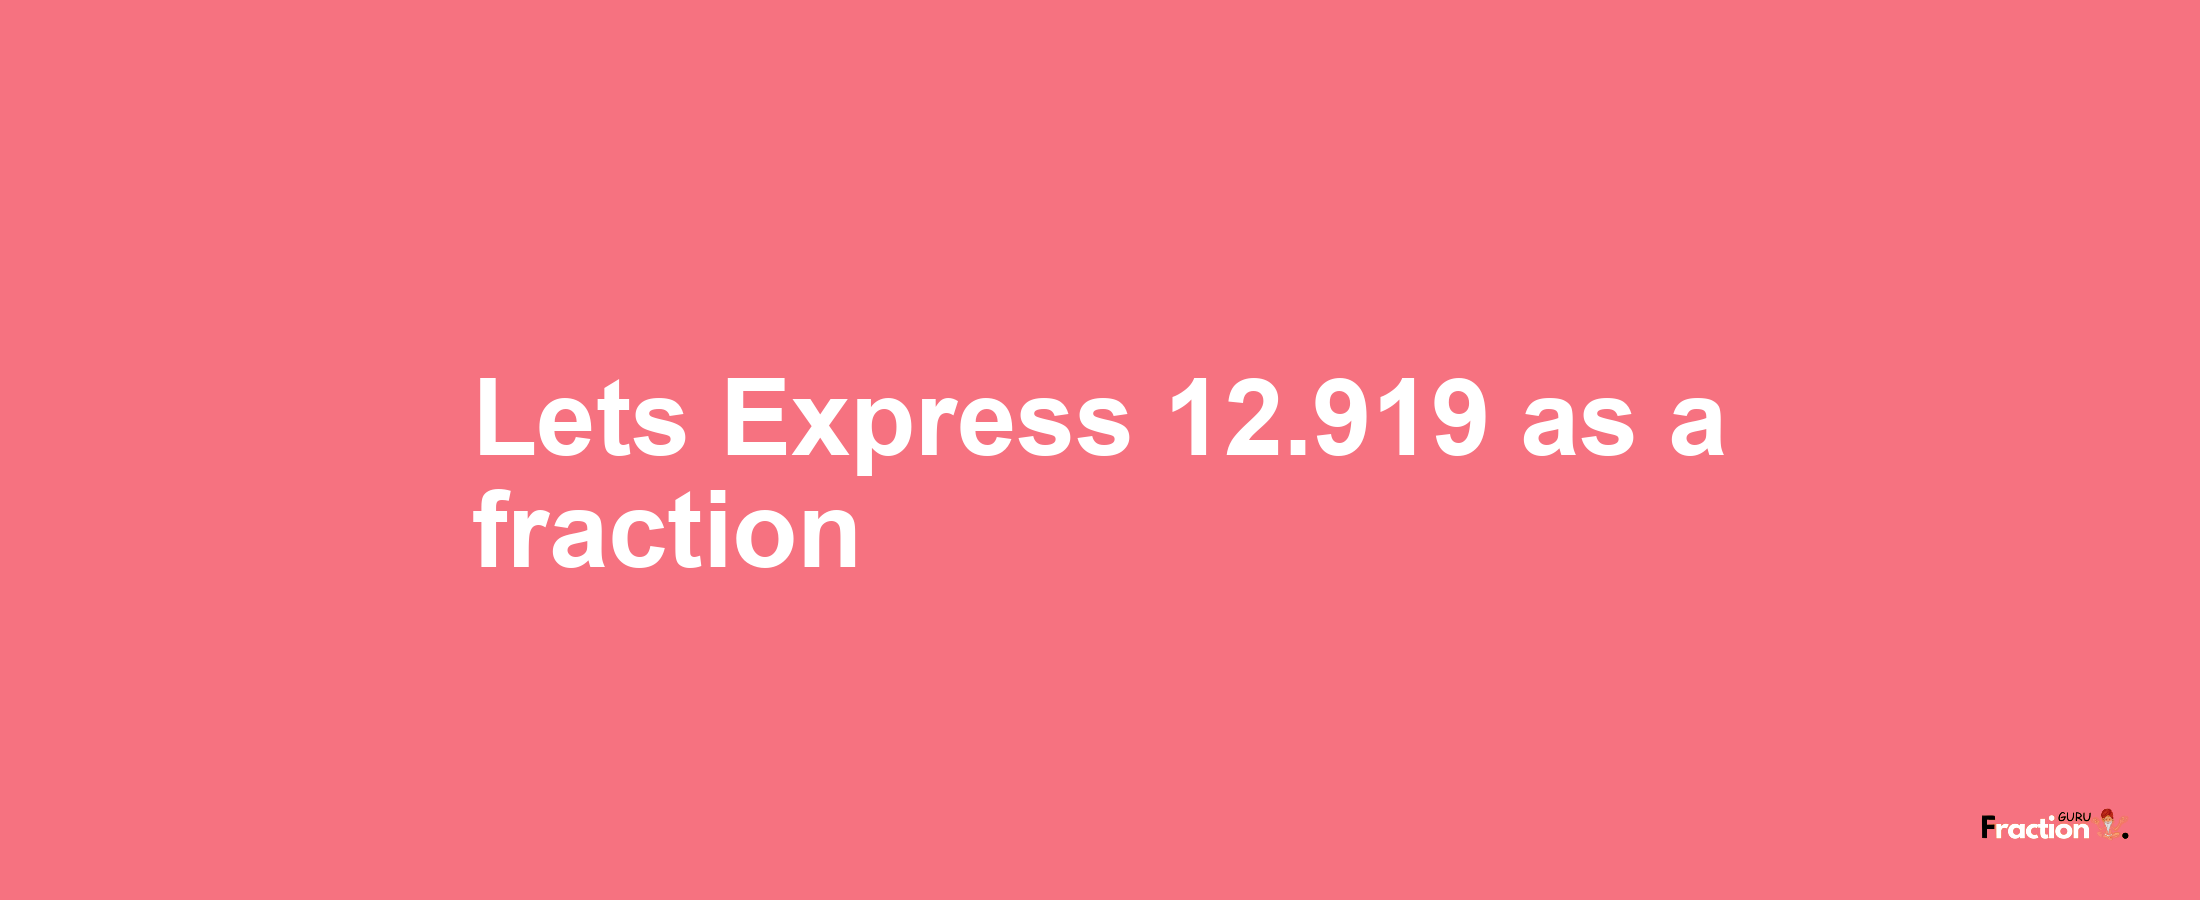 Lets Express 12.919 as afraction